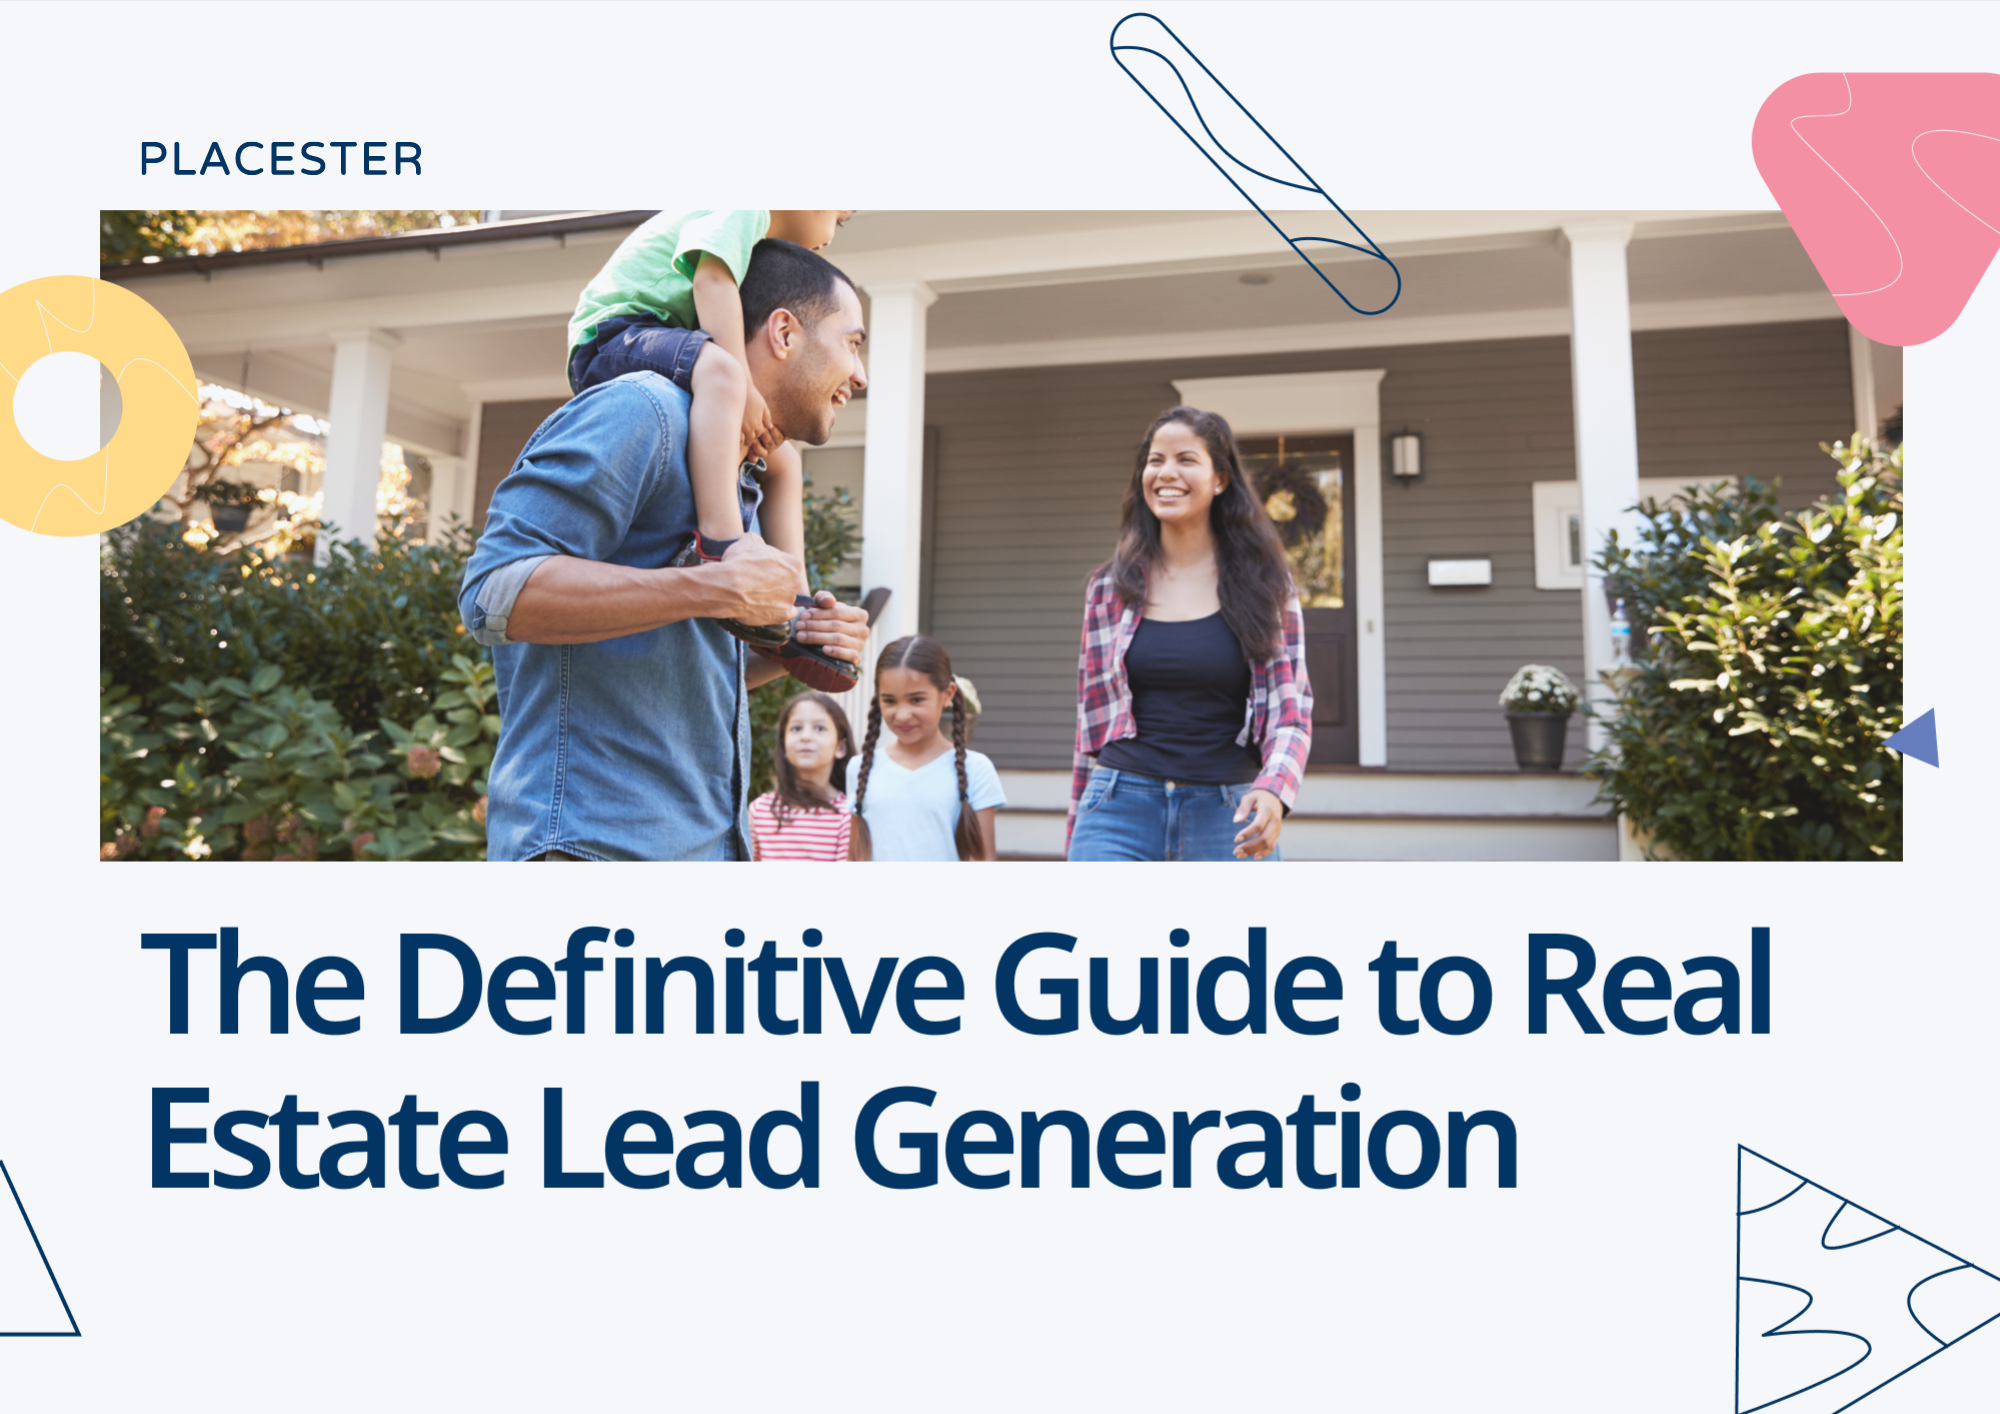 The Comprehensive Guide to Capturing and Converting Leads